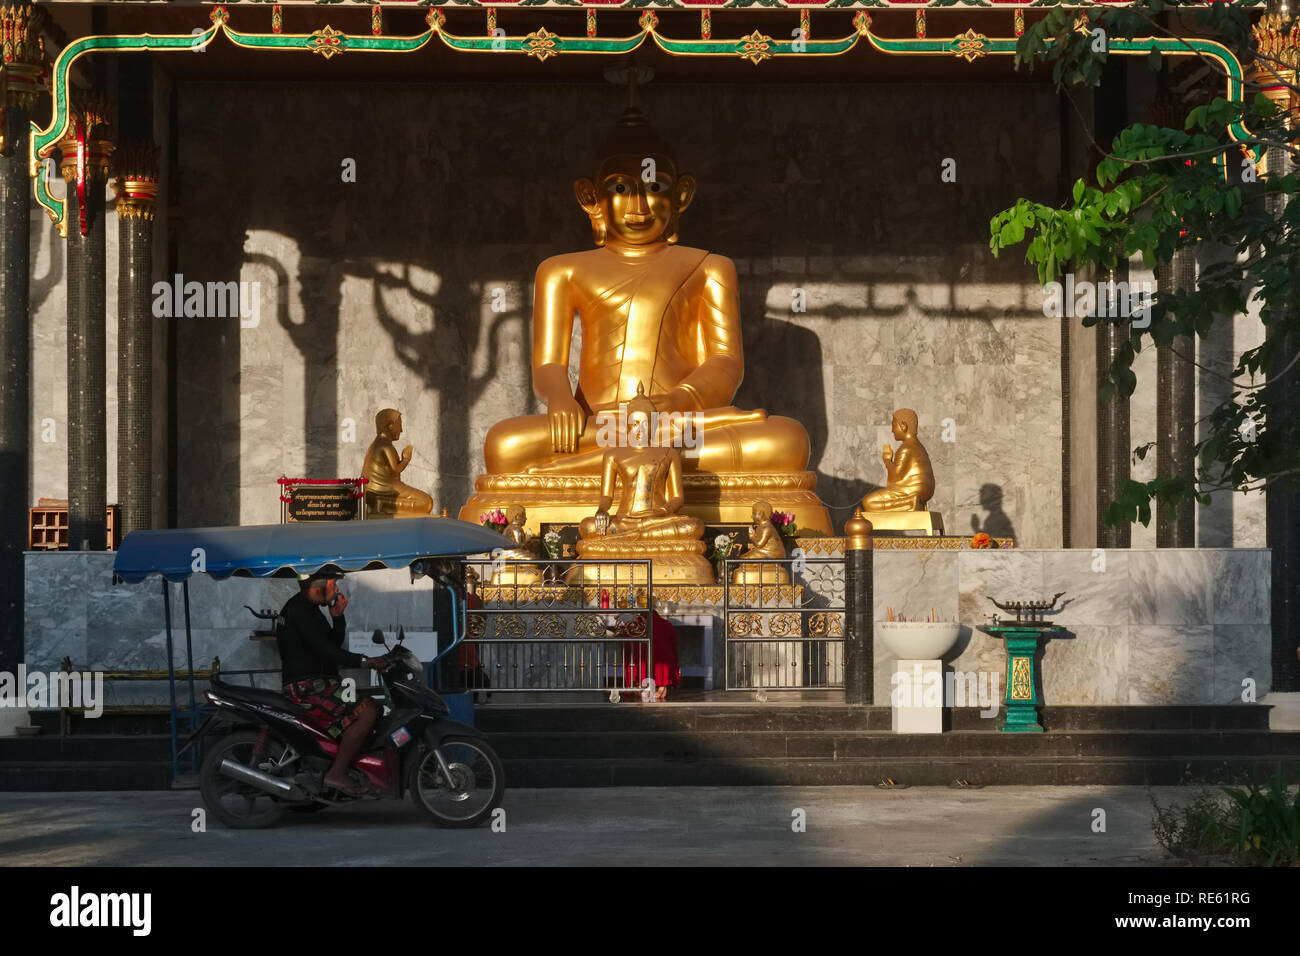 On an early morning,  man on a motorbike with sidecar passes a sun-lit golden Buddha statue at Wat Thepkassatri (Wat Don), Thalang, Phuket, Thailand Stock Photo